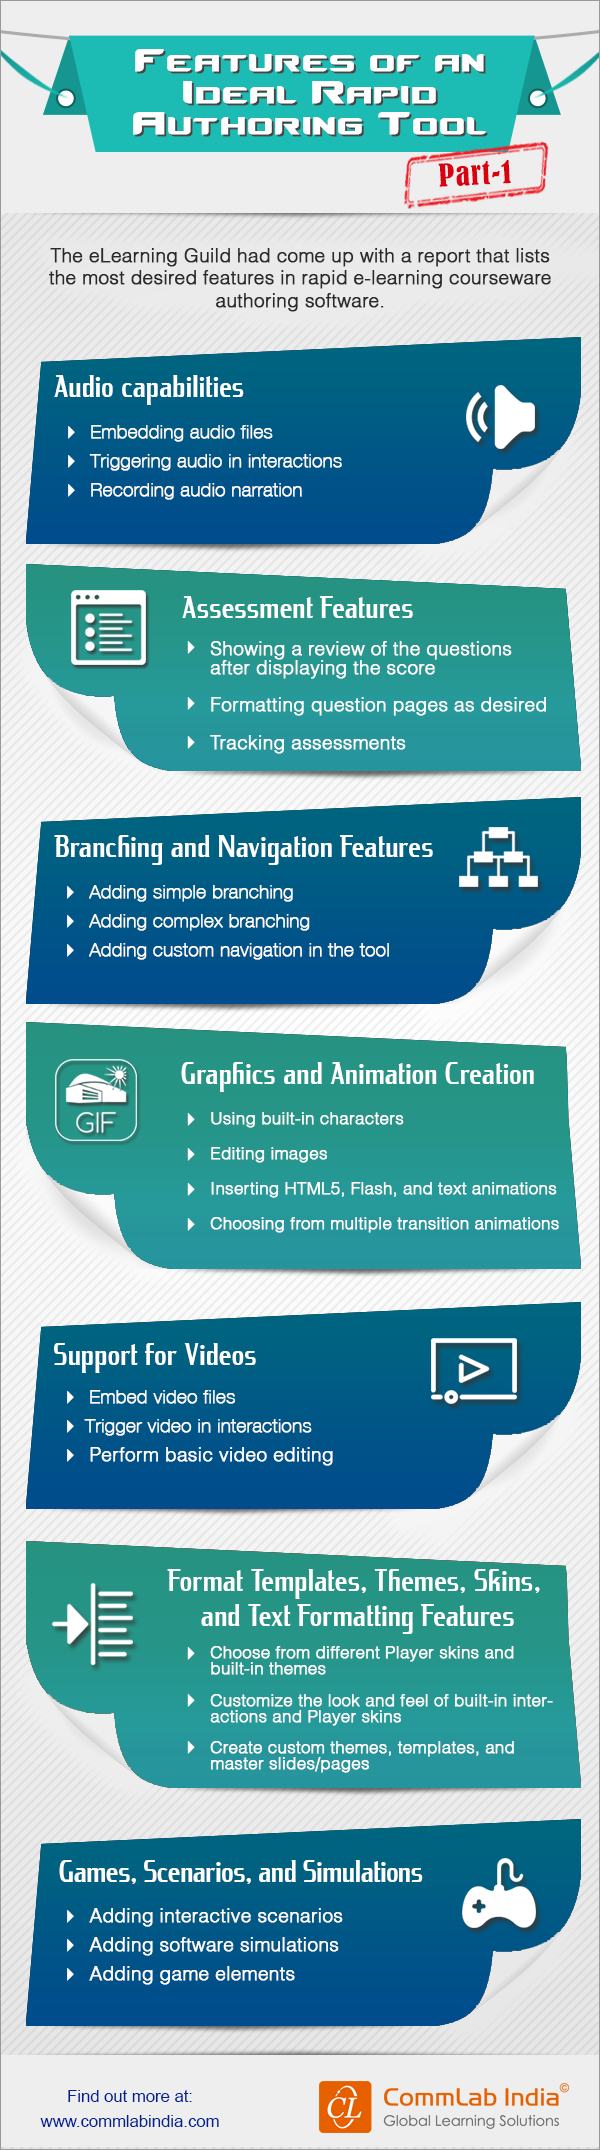 Features of an Ideal Rapid eLearning Authoring Tool - Part I [Infographic]